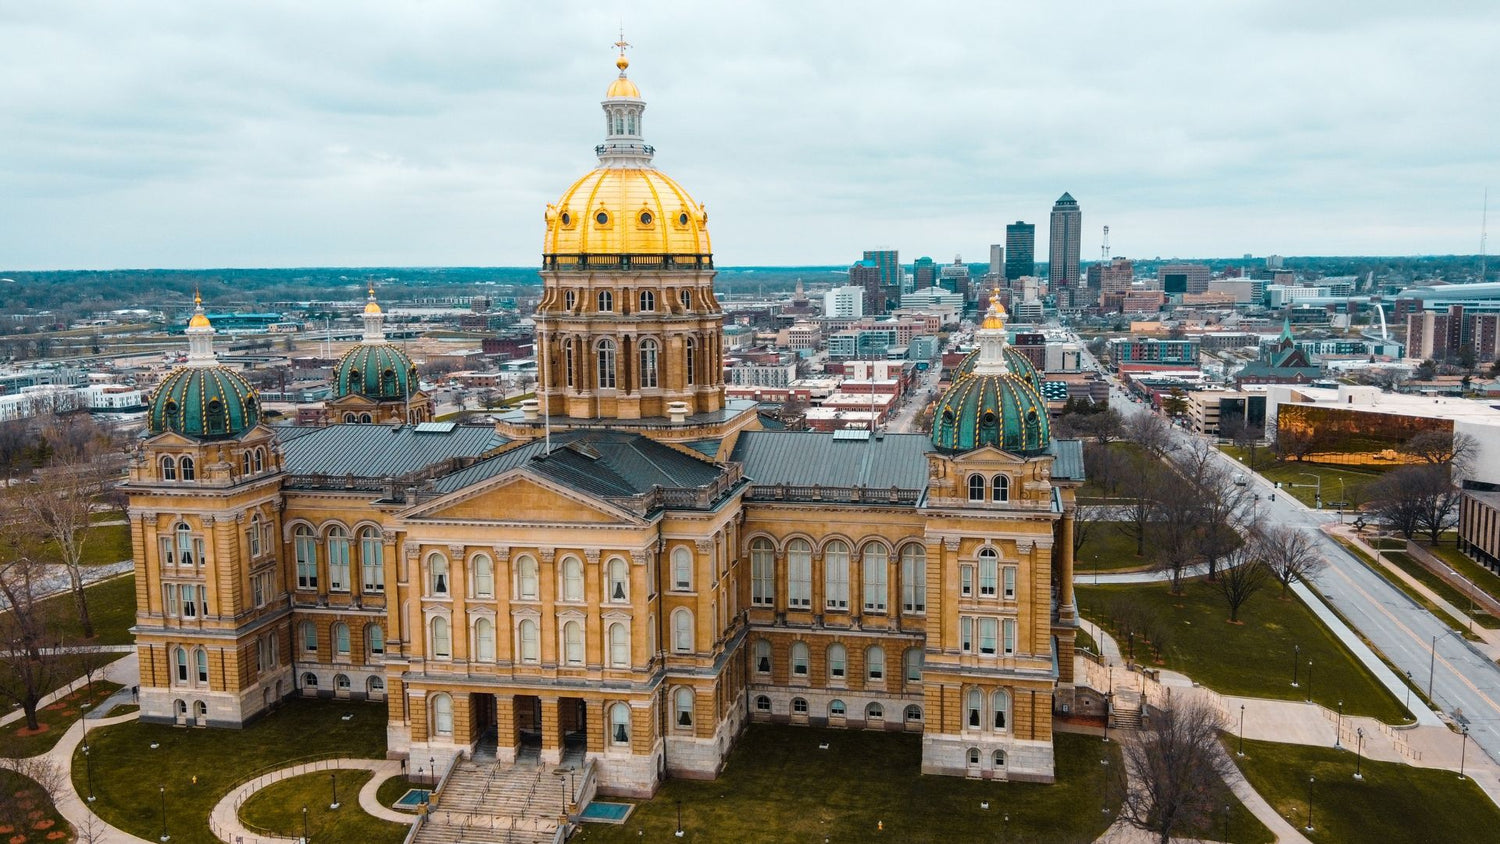 Aerial view of Des Moines Capitol building with the city in the background. - History By Mail